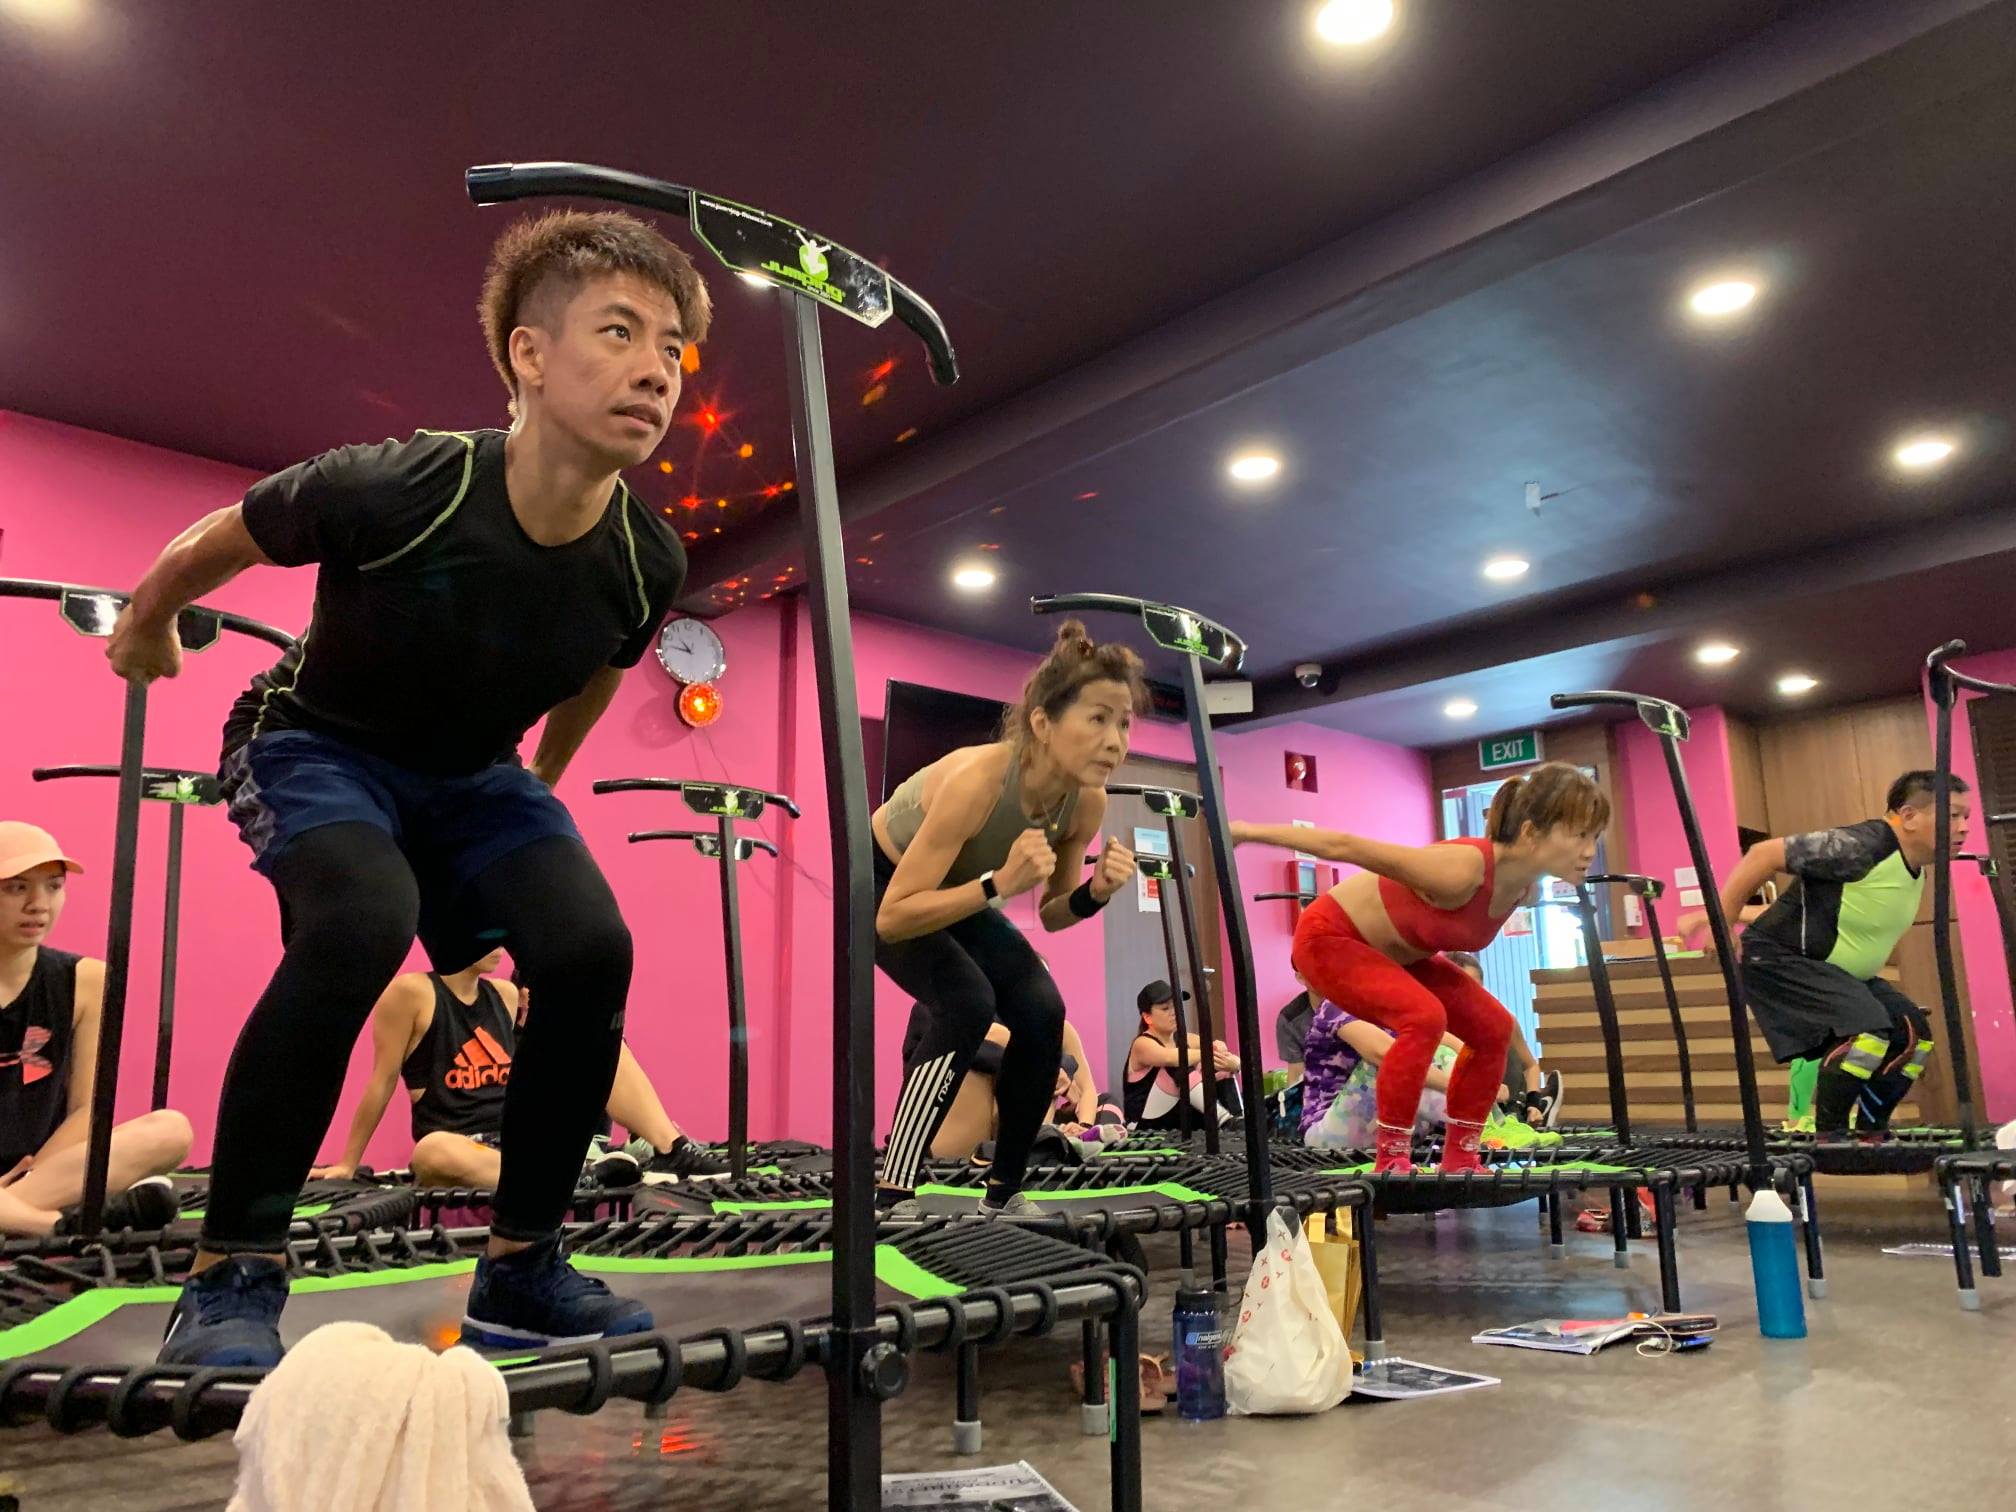 Things to do North Singapore - Jumping Singapore Yishun - Keep fit with trampolines